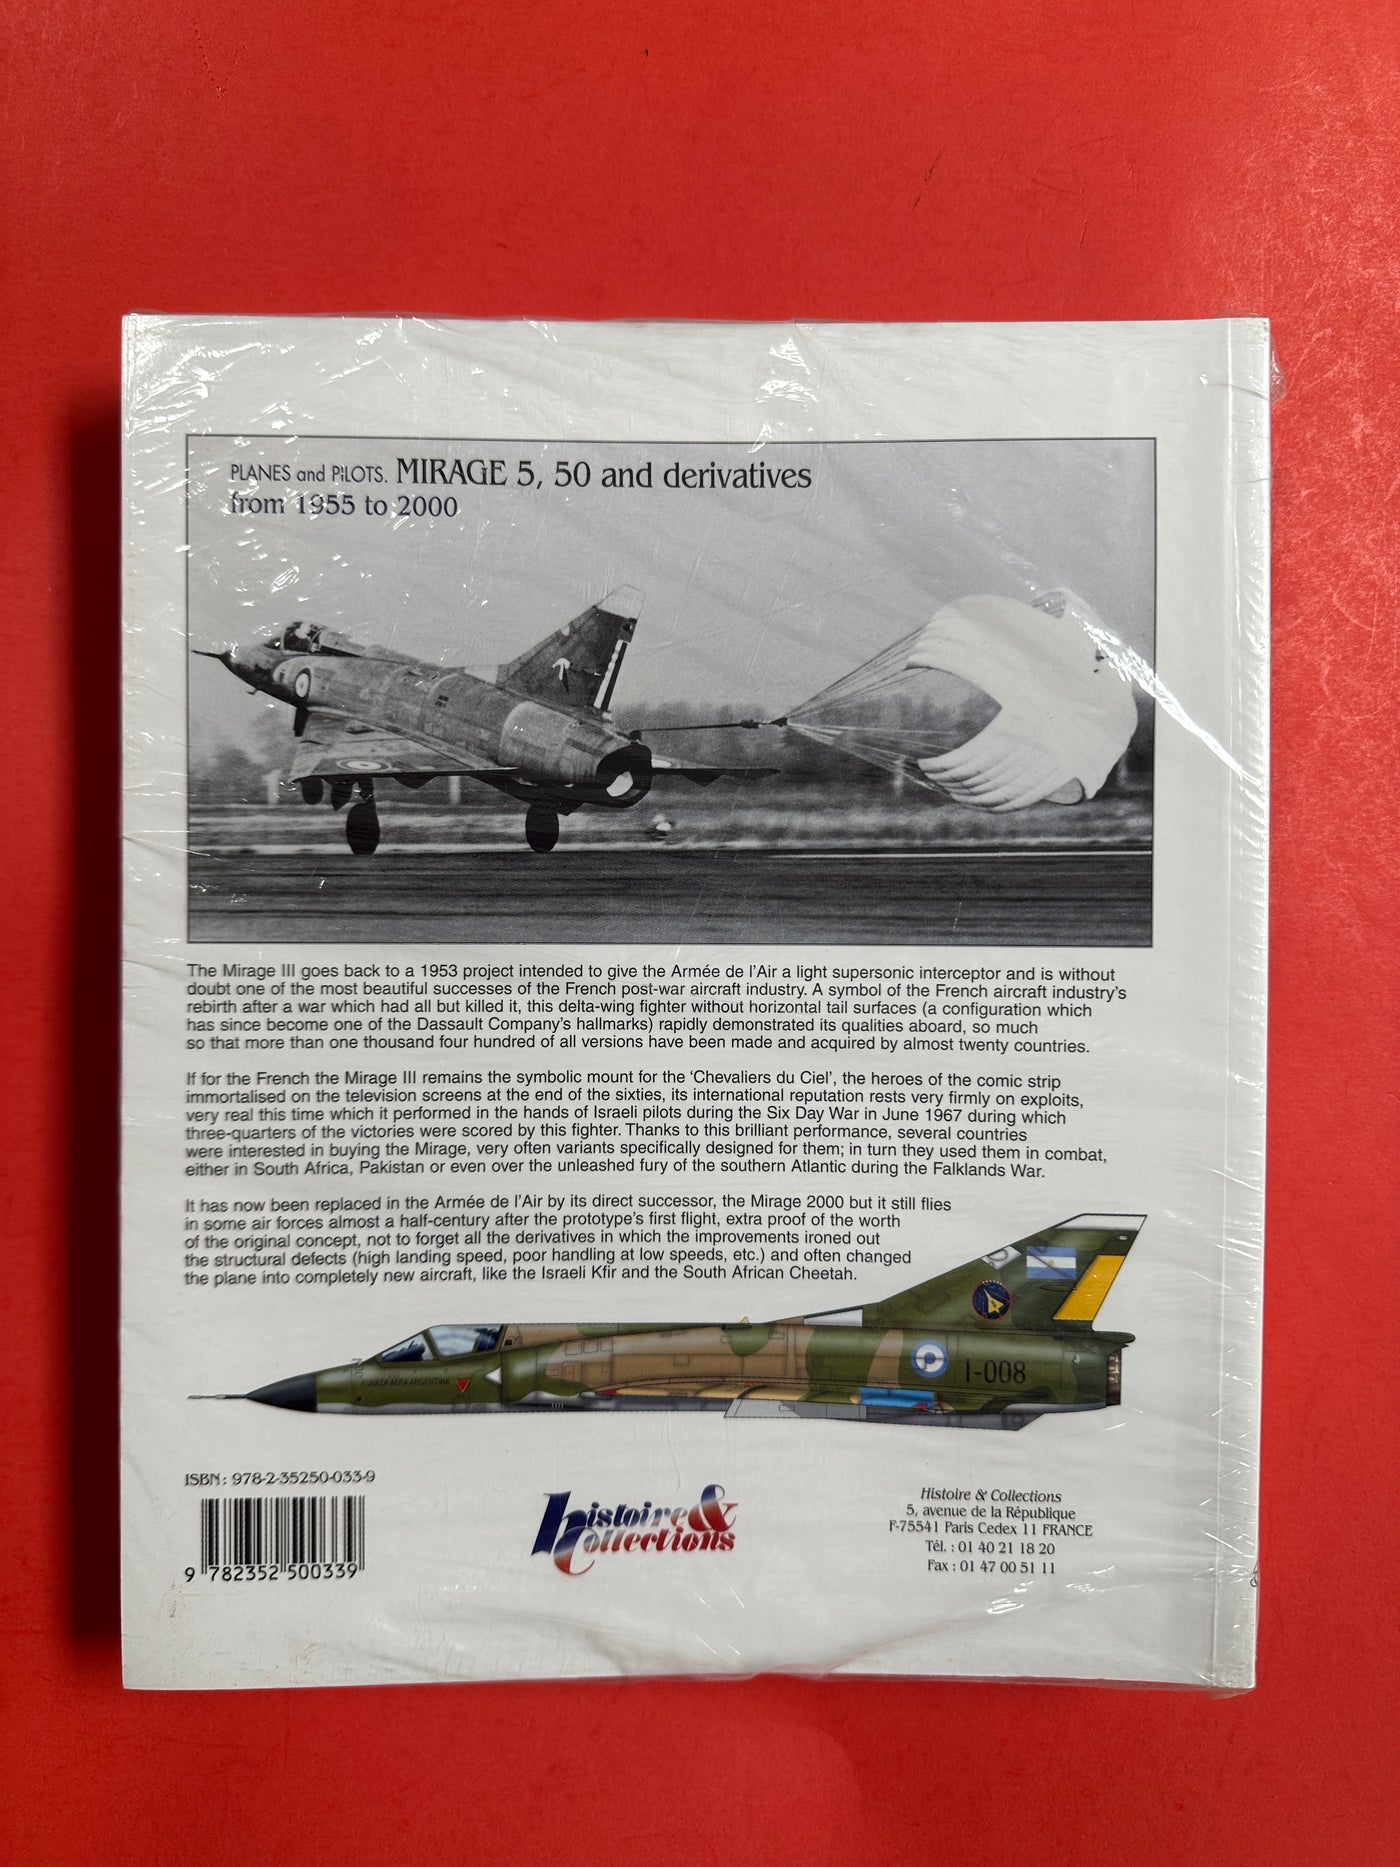 Mirage III-C: From 1955 - 2000 (Planes and Pilots 6)